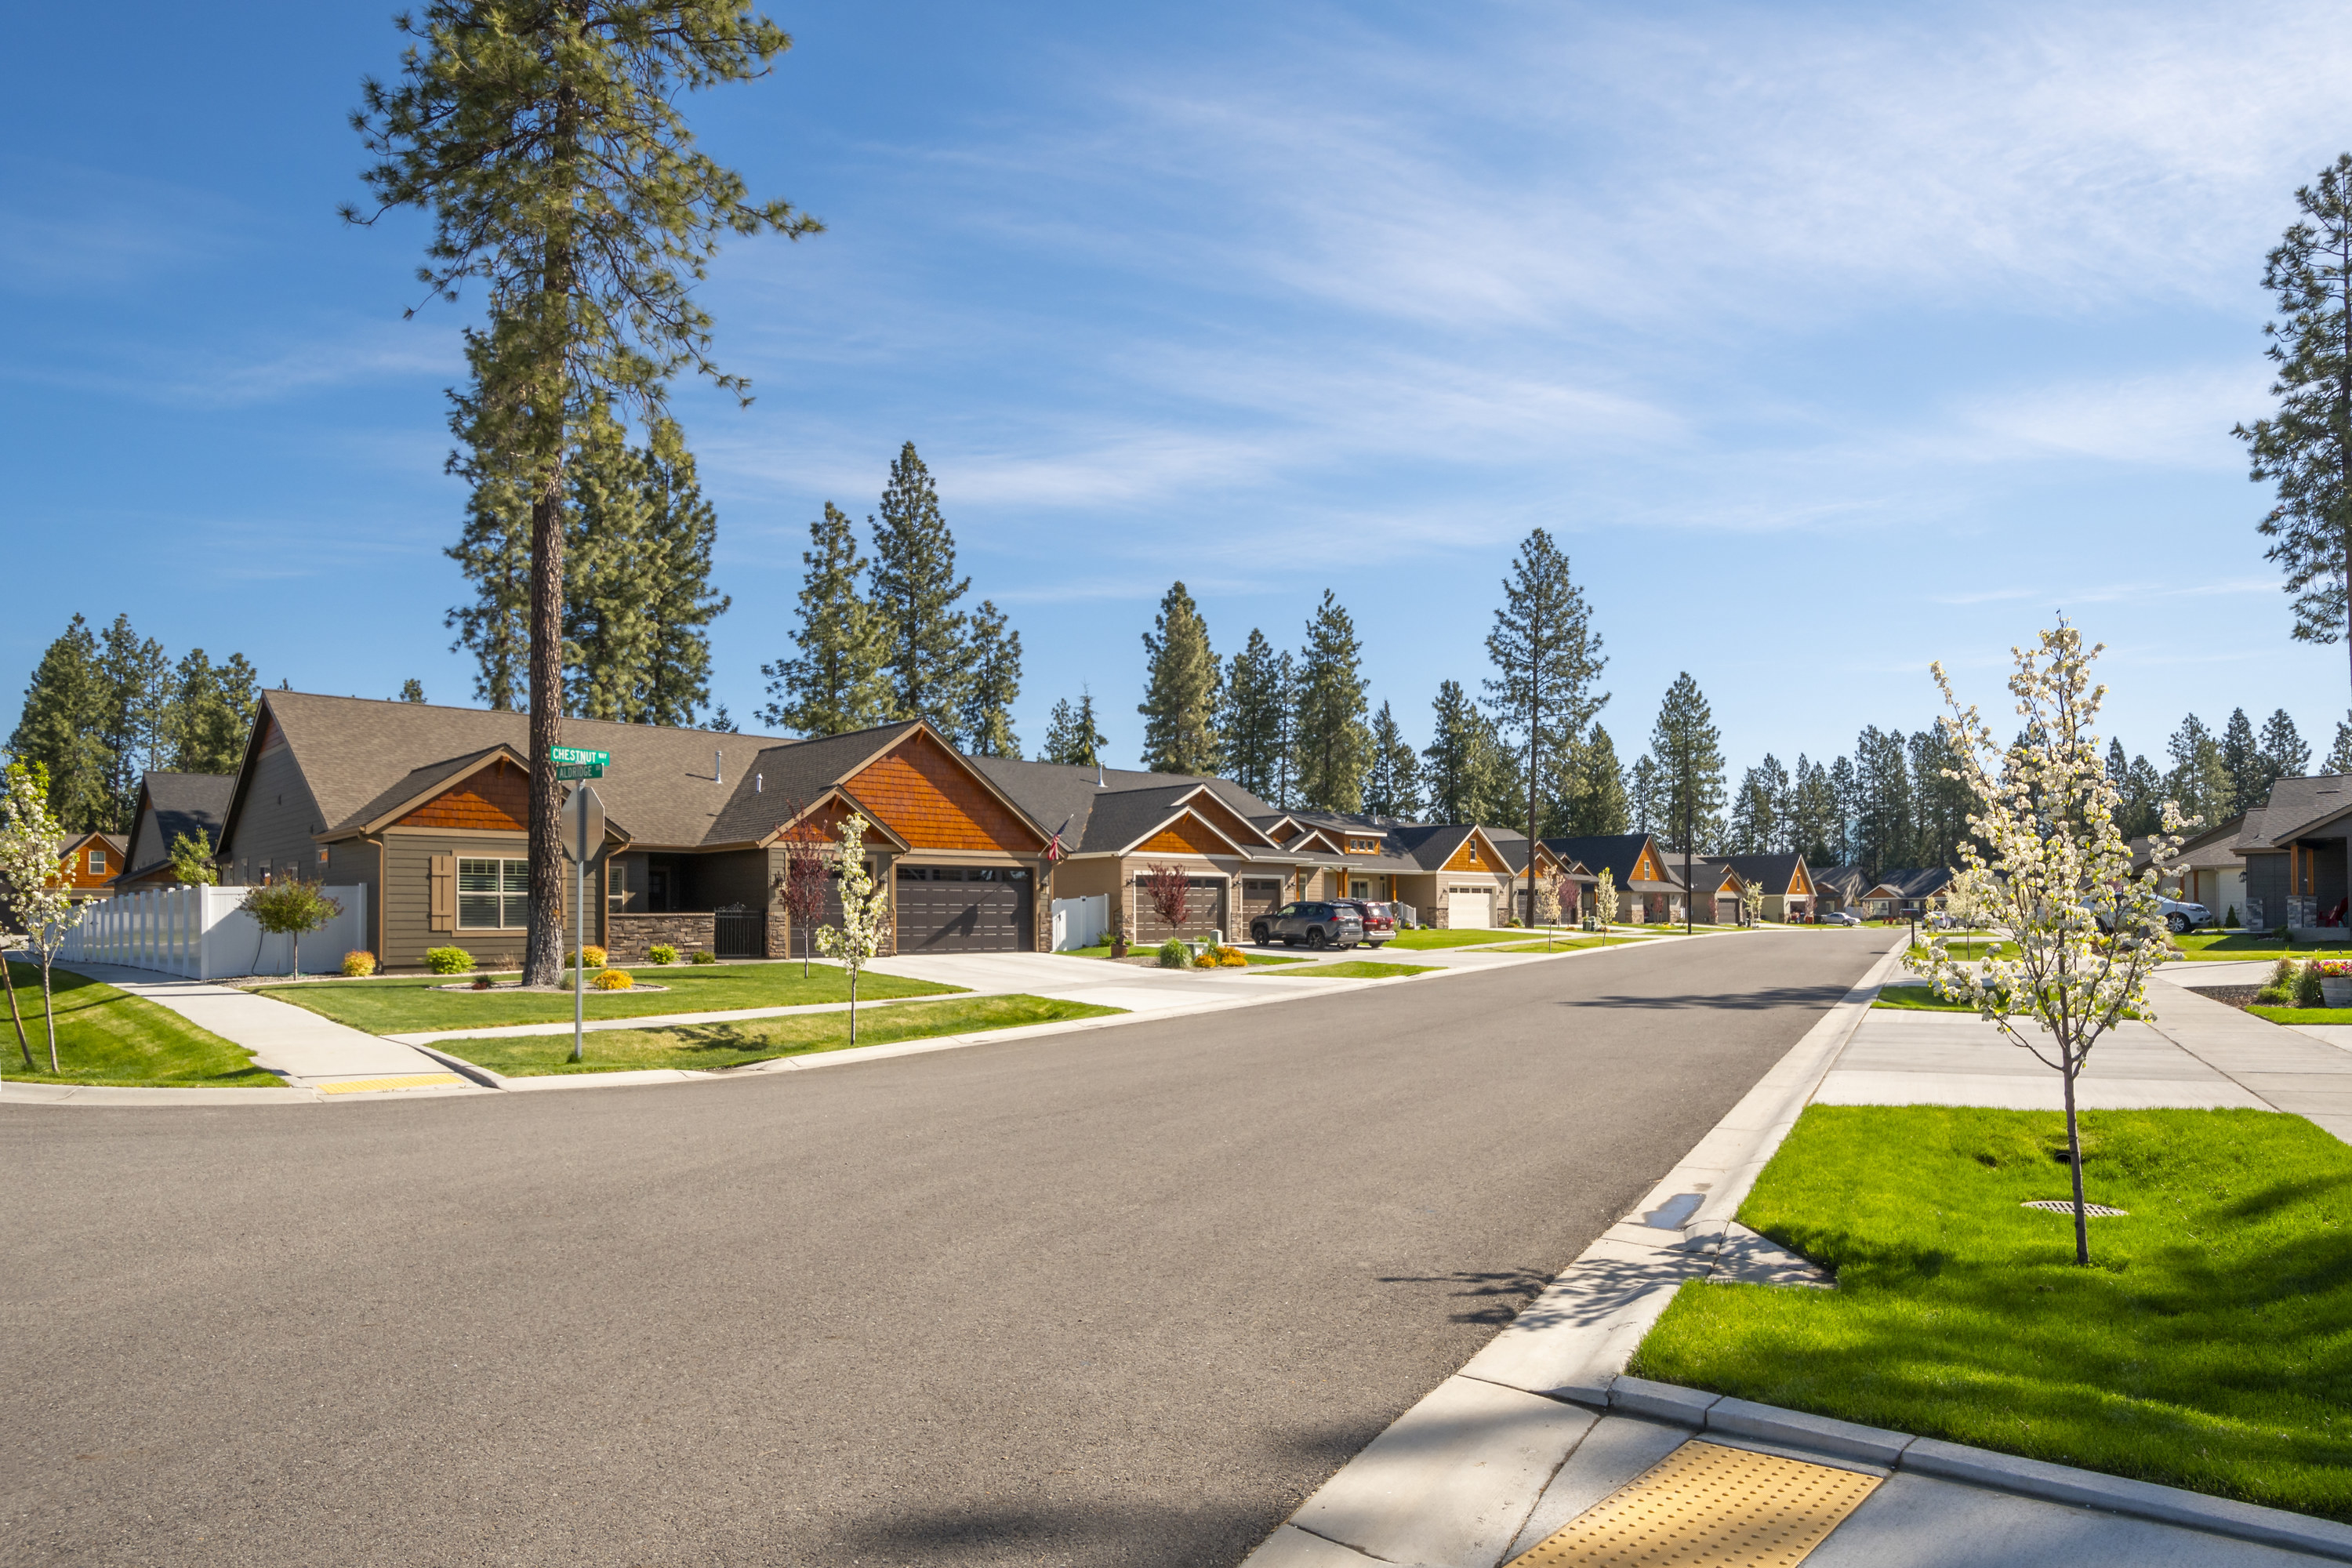 A row of new single story homes with garages on a suburban street in the city of Coeur d&#x27;Alene, Idaho